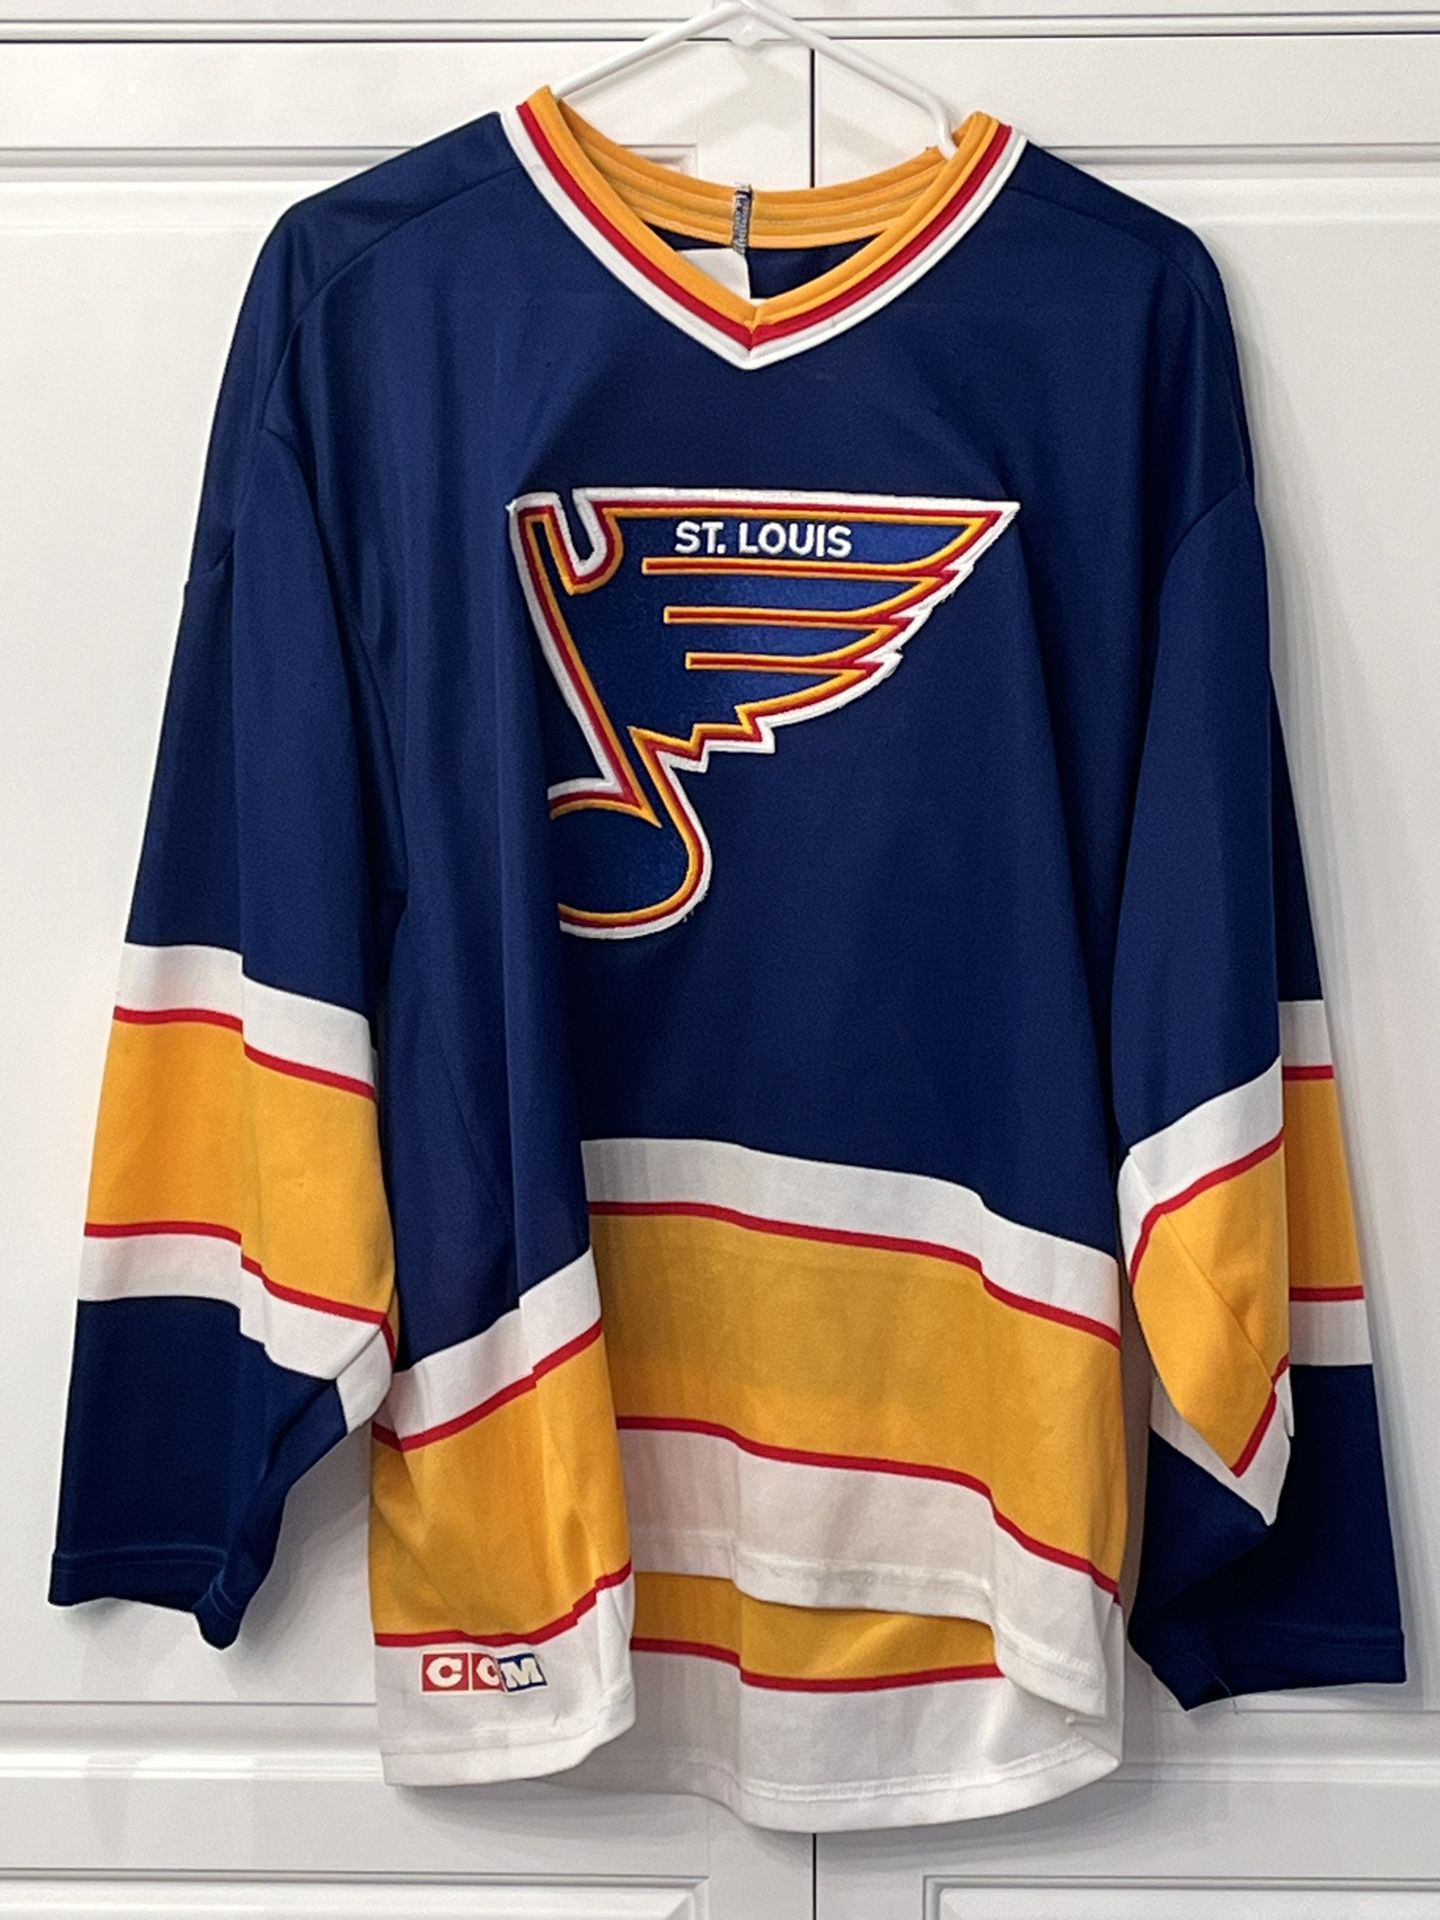 St. Louis Blues Hockey Jersey for Sale in Lake Forest, CA - OfferUp